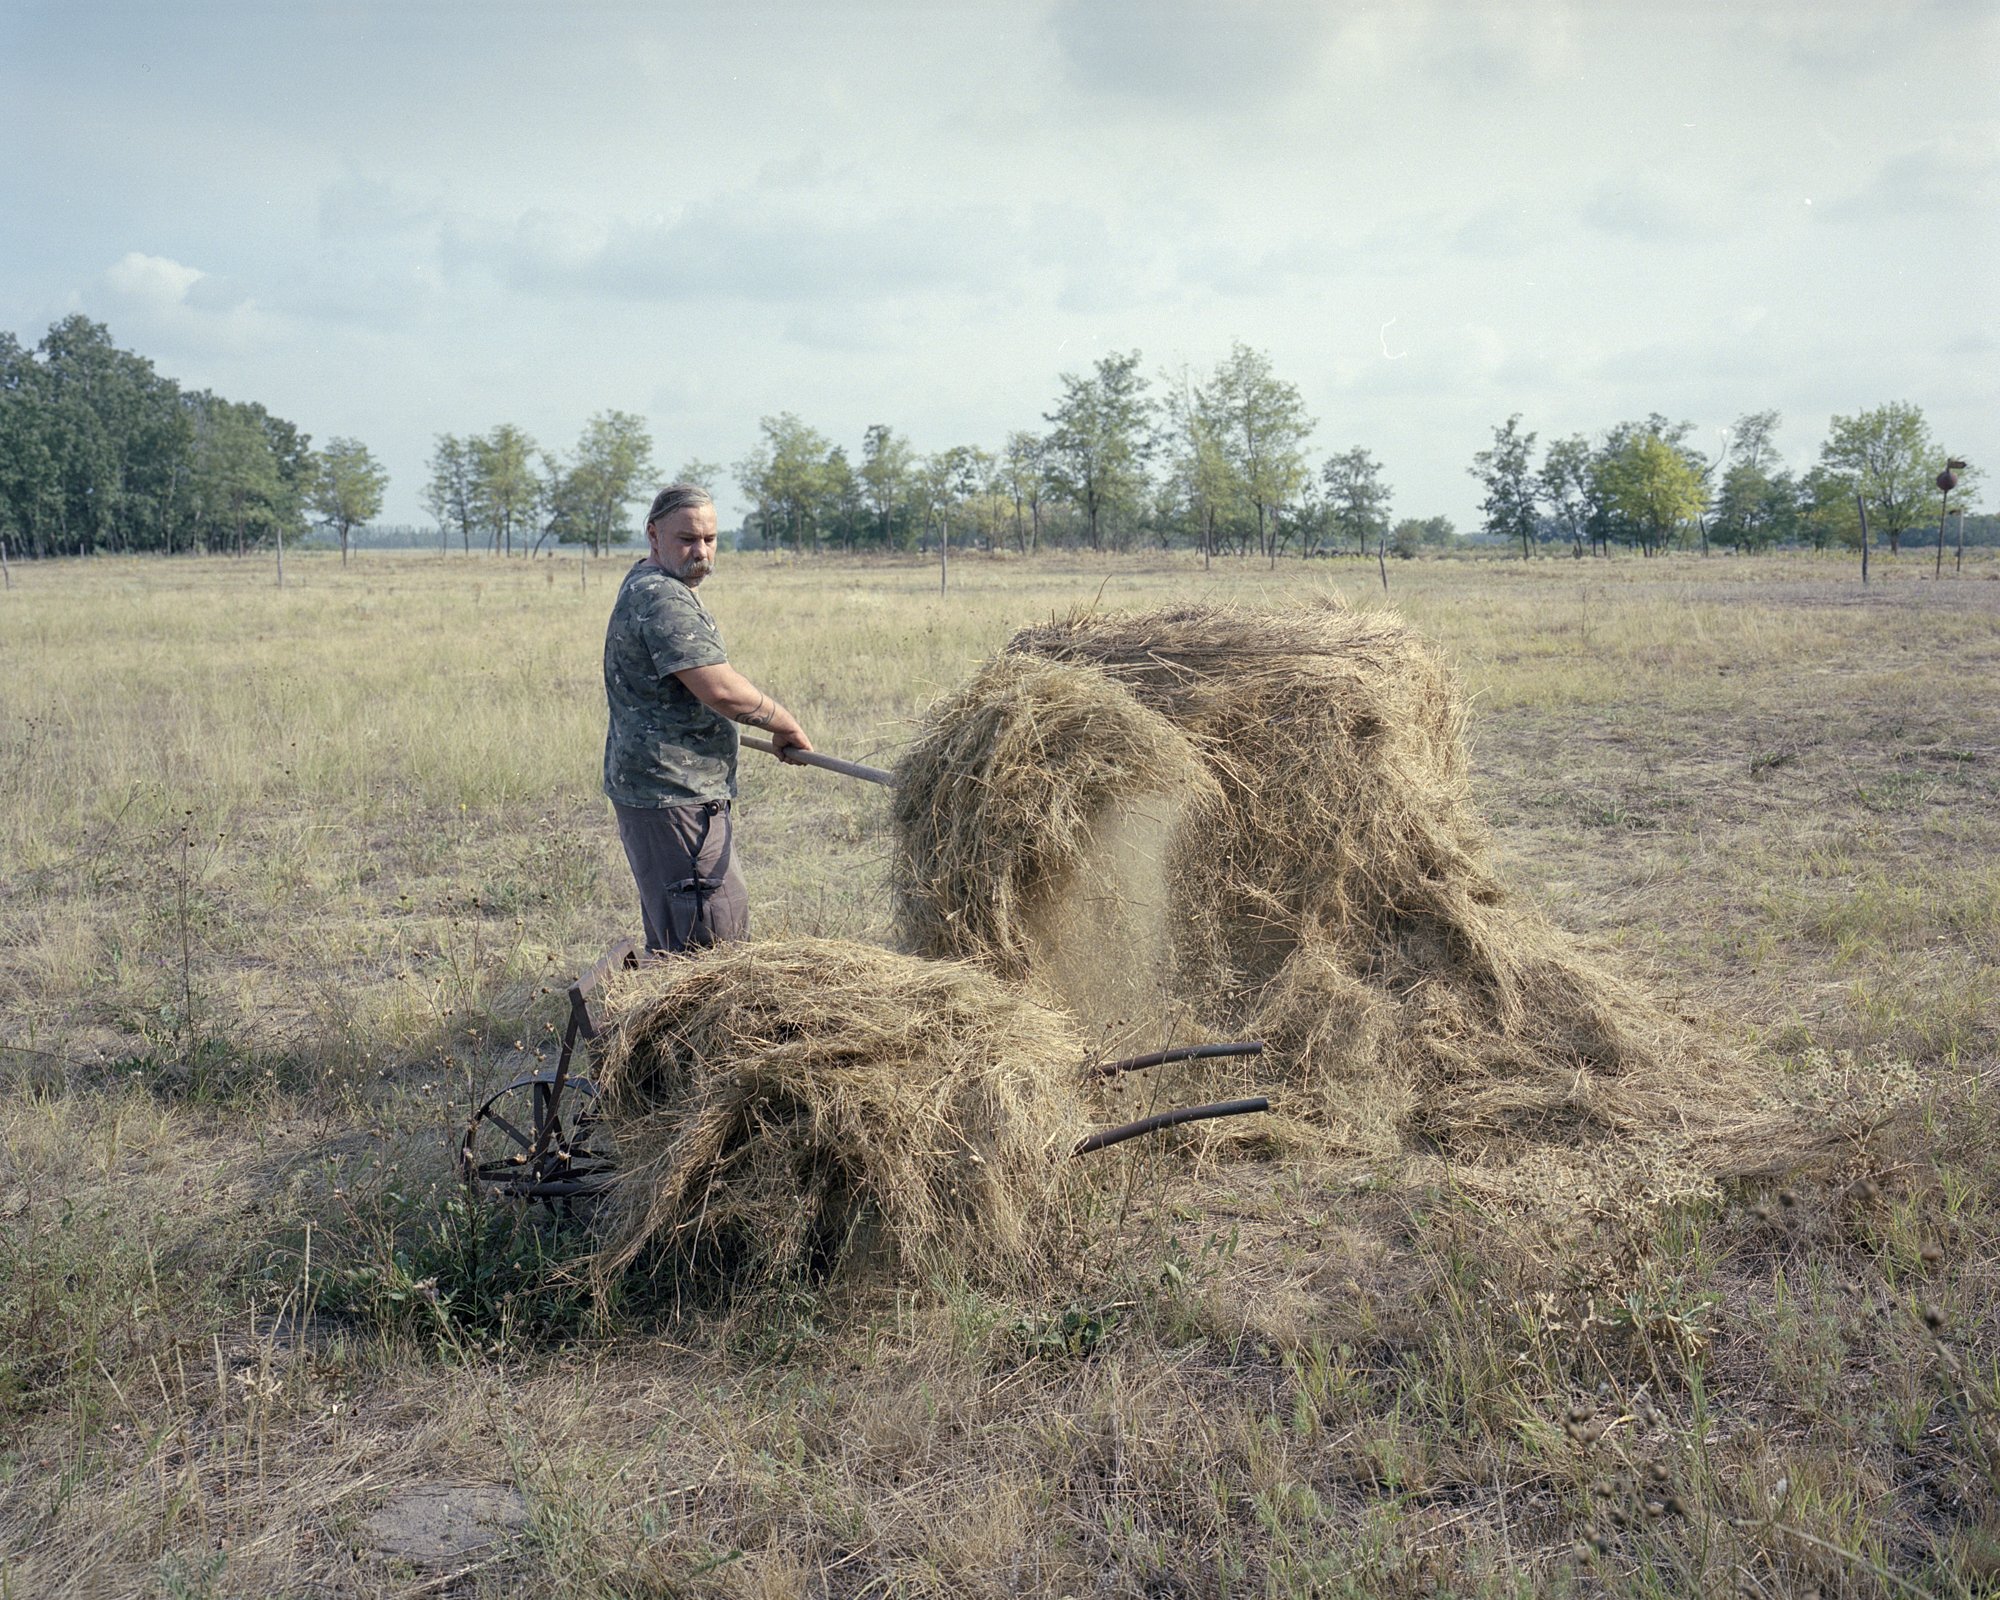  László Kulcsár preparing food for his horses. Fields were not mowable this year due to early drought. Kunszentmiklós, Hungary 2022 